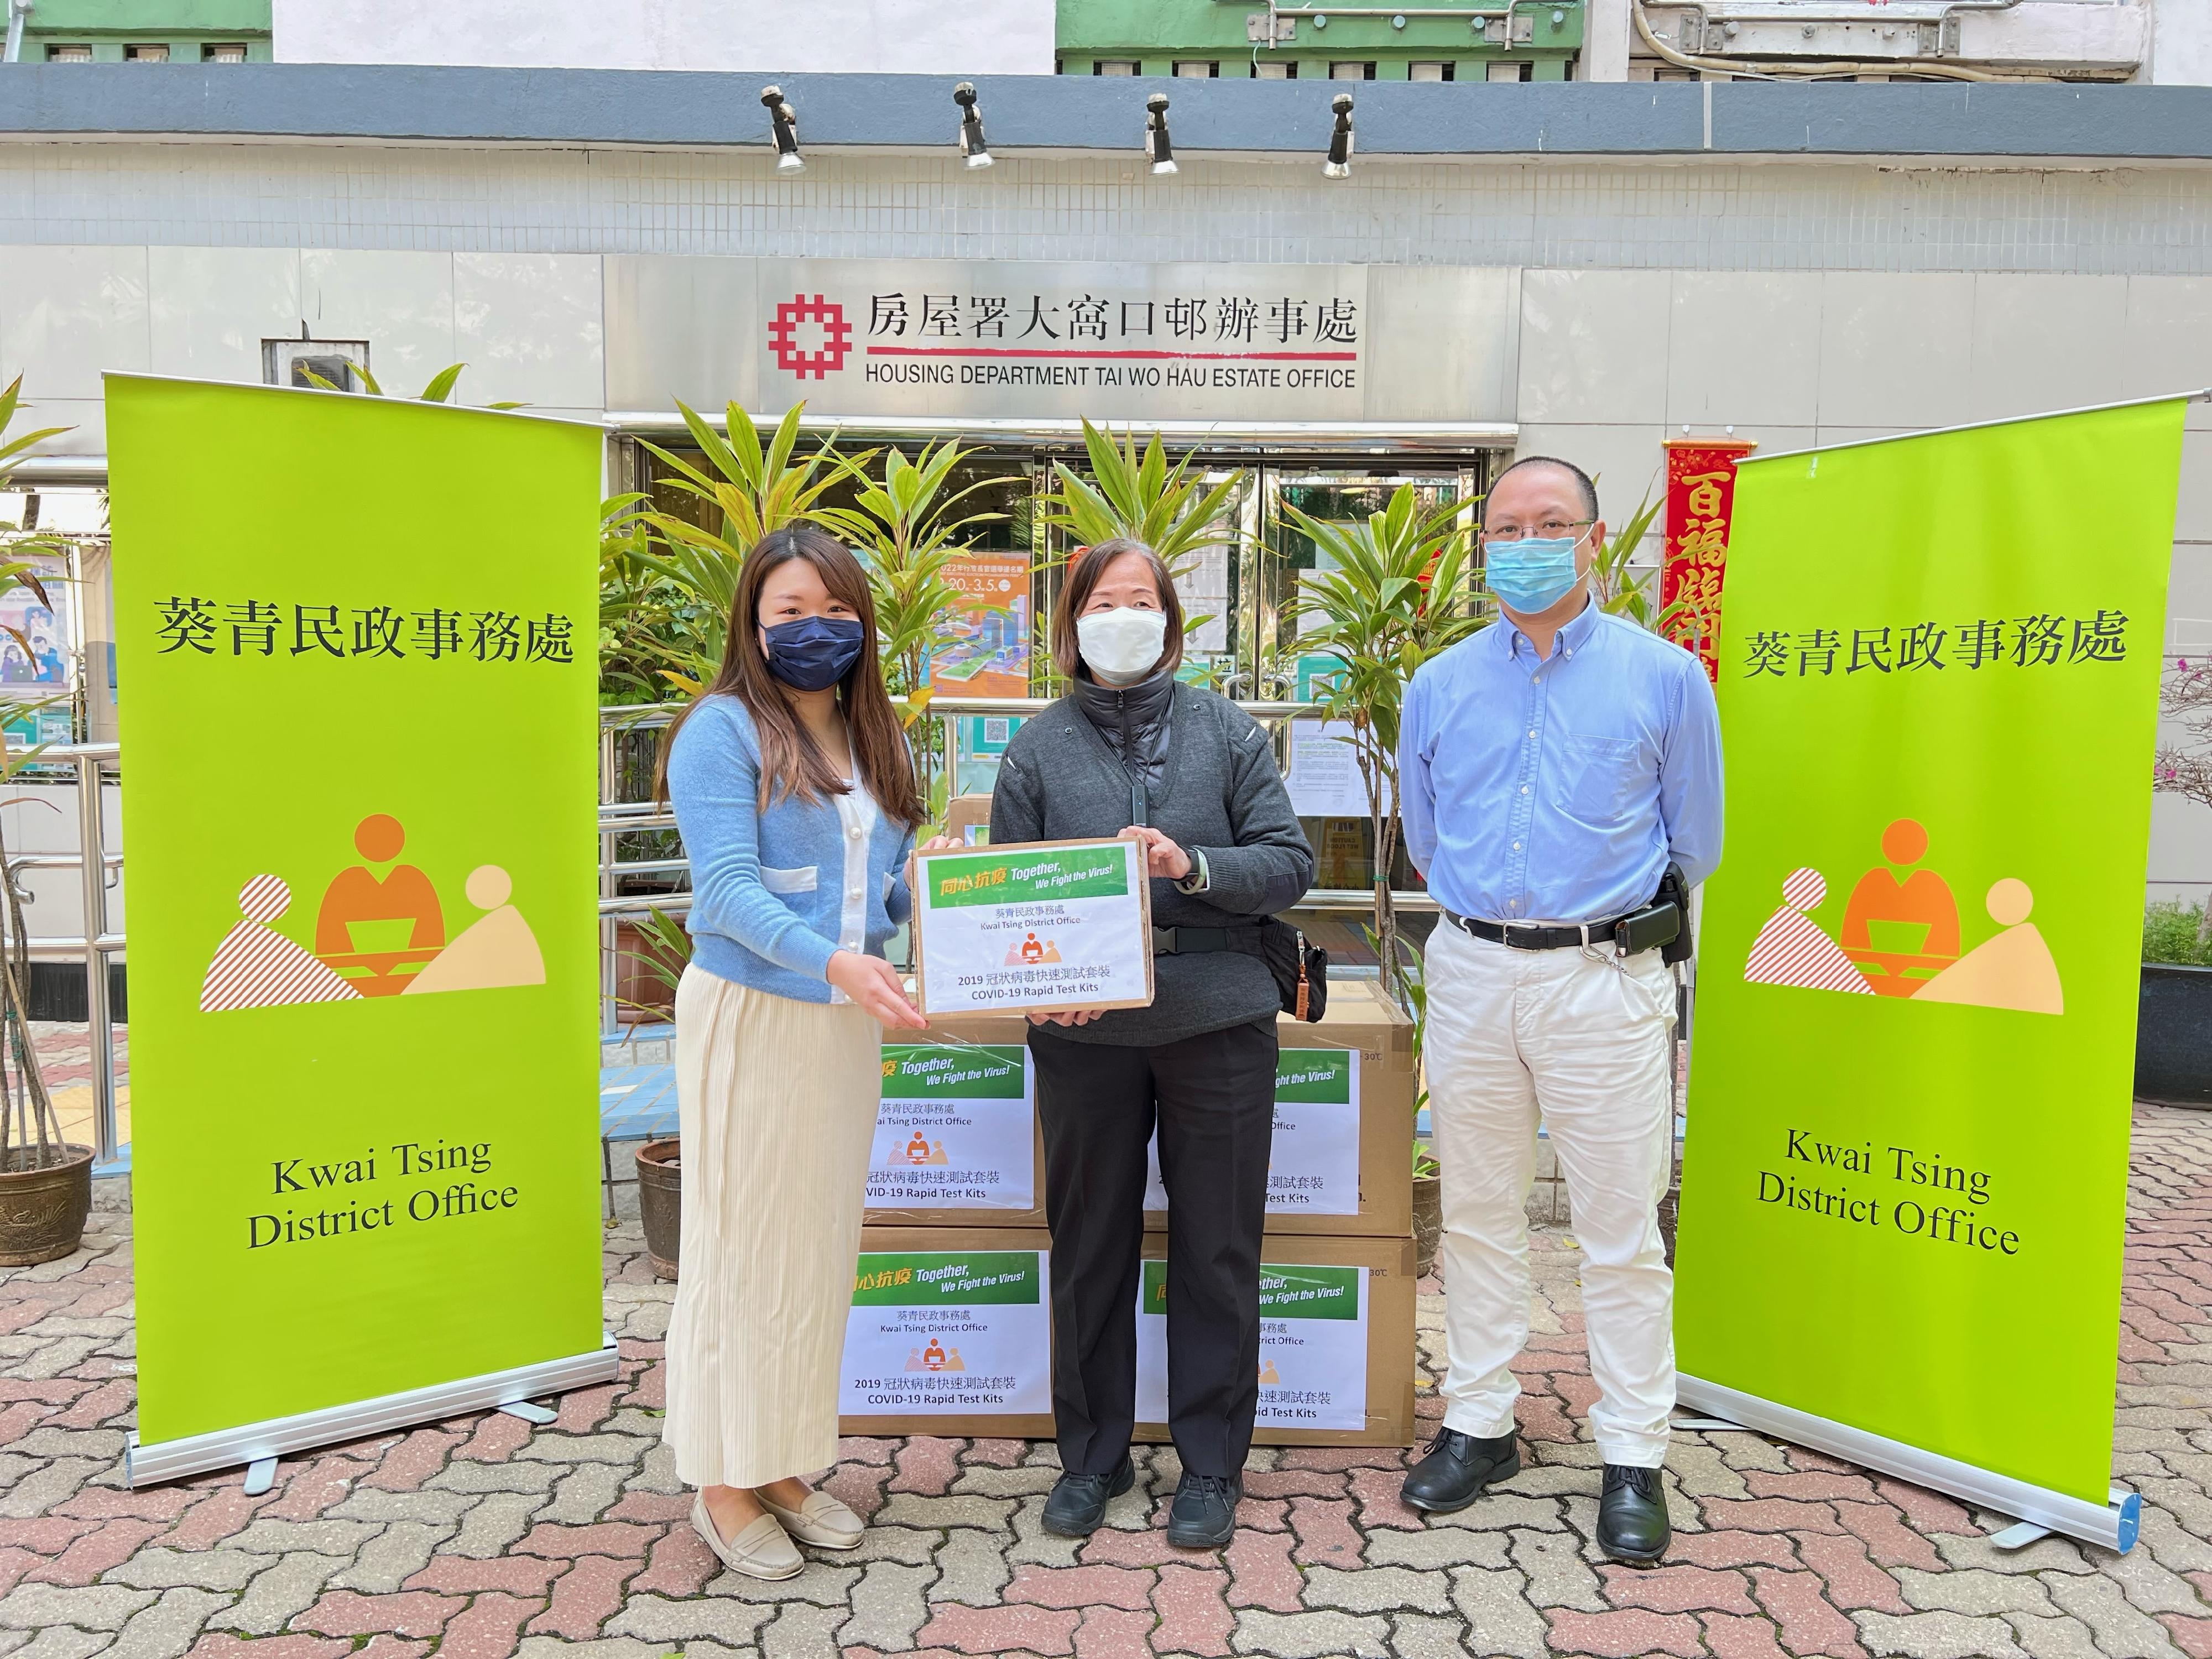 The Kwai Tsing District Office today (February 25) distributed rapid test kits to households, cleansing workers and property management staff working in Fu Yin House and Fu Keung House of Tai Wo Hau Estate for voluntary testing through the Housing Department and the Estate's property management company.